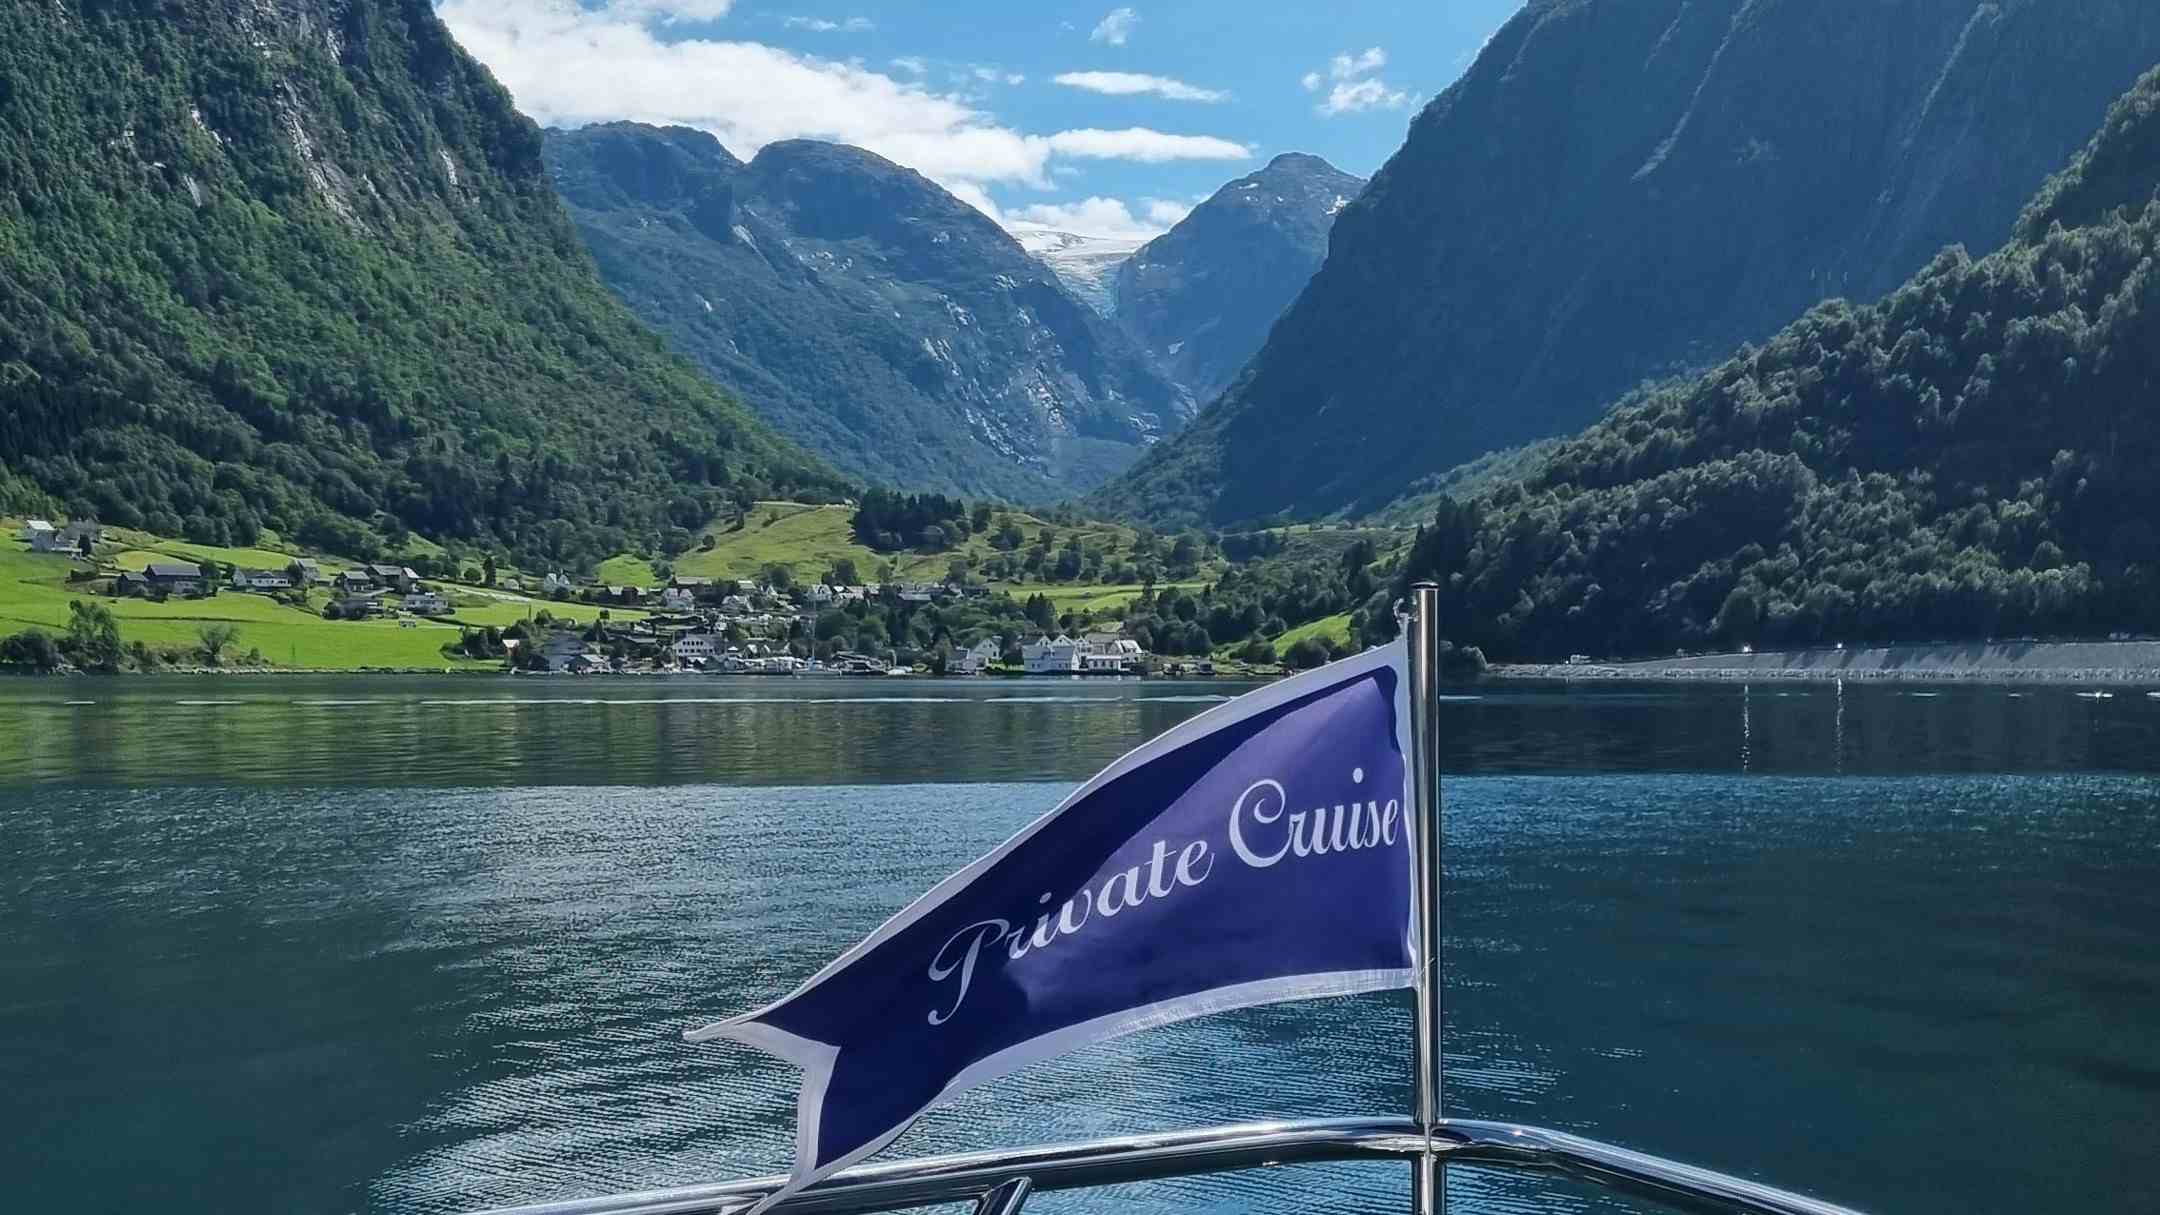 The flag of the behind of the boat facing picturesque fjord landscapes